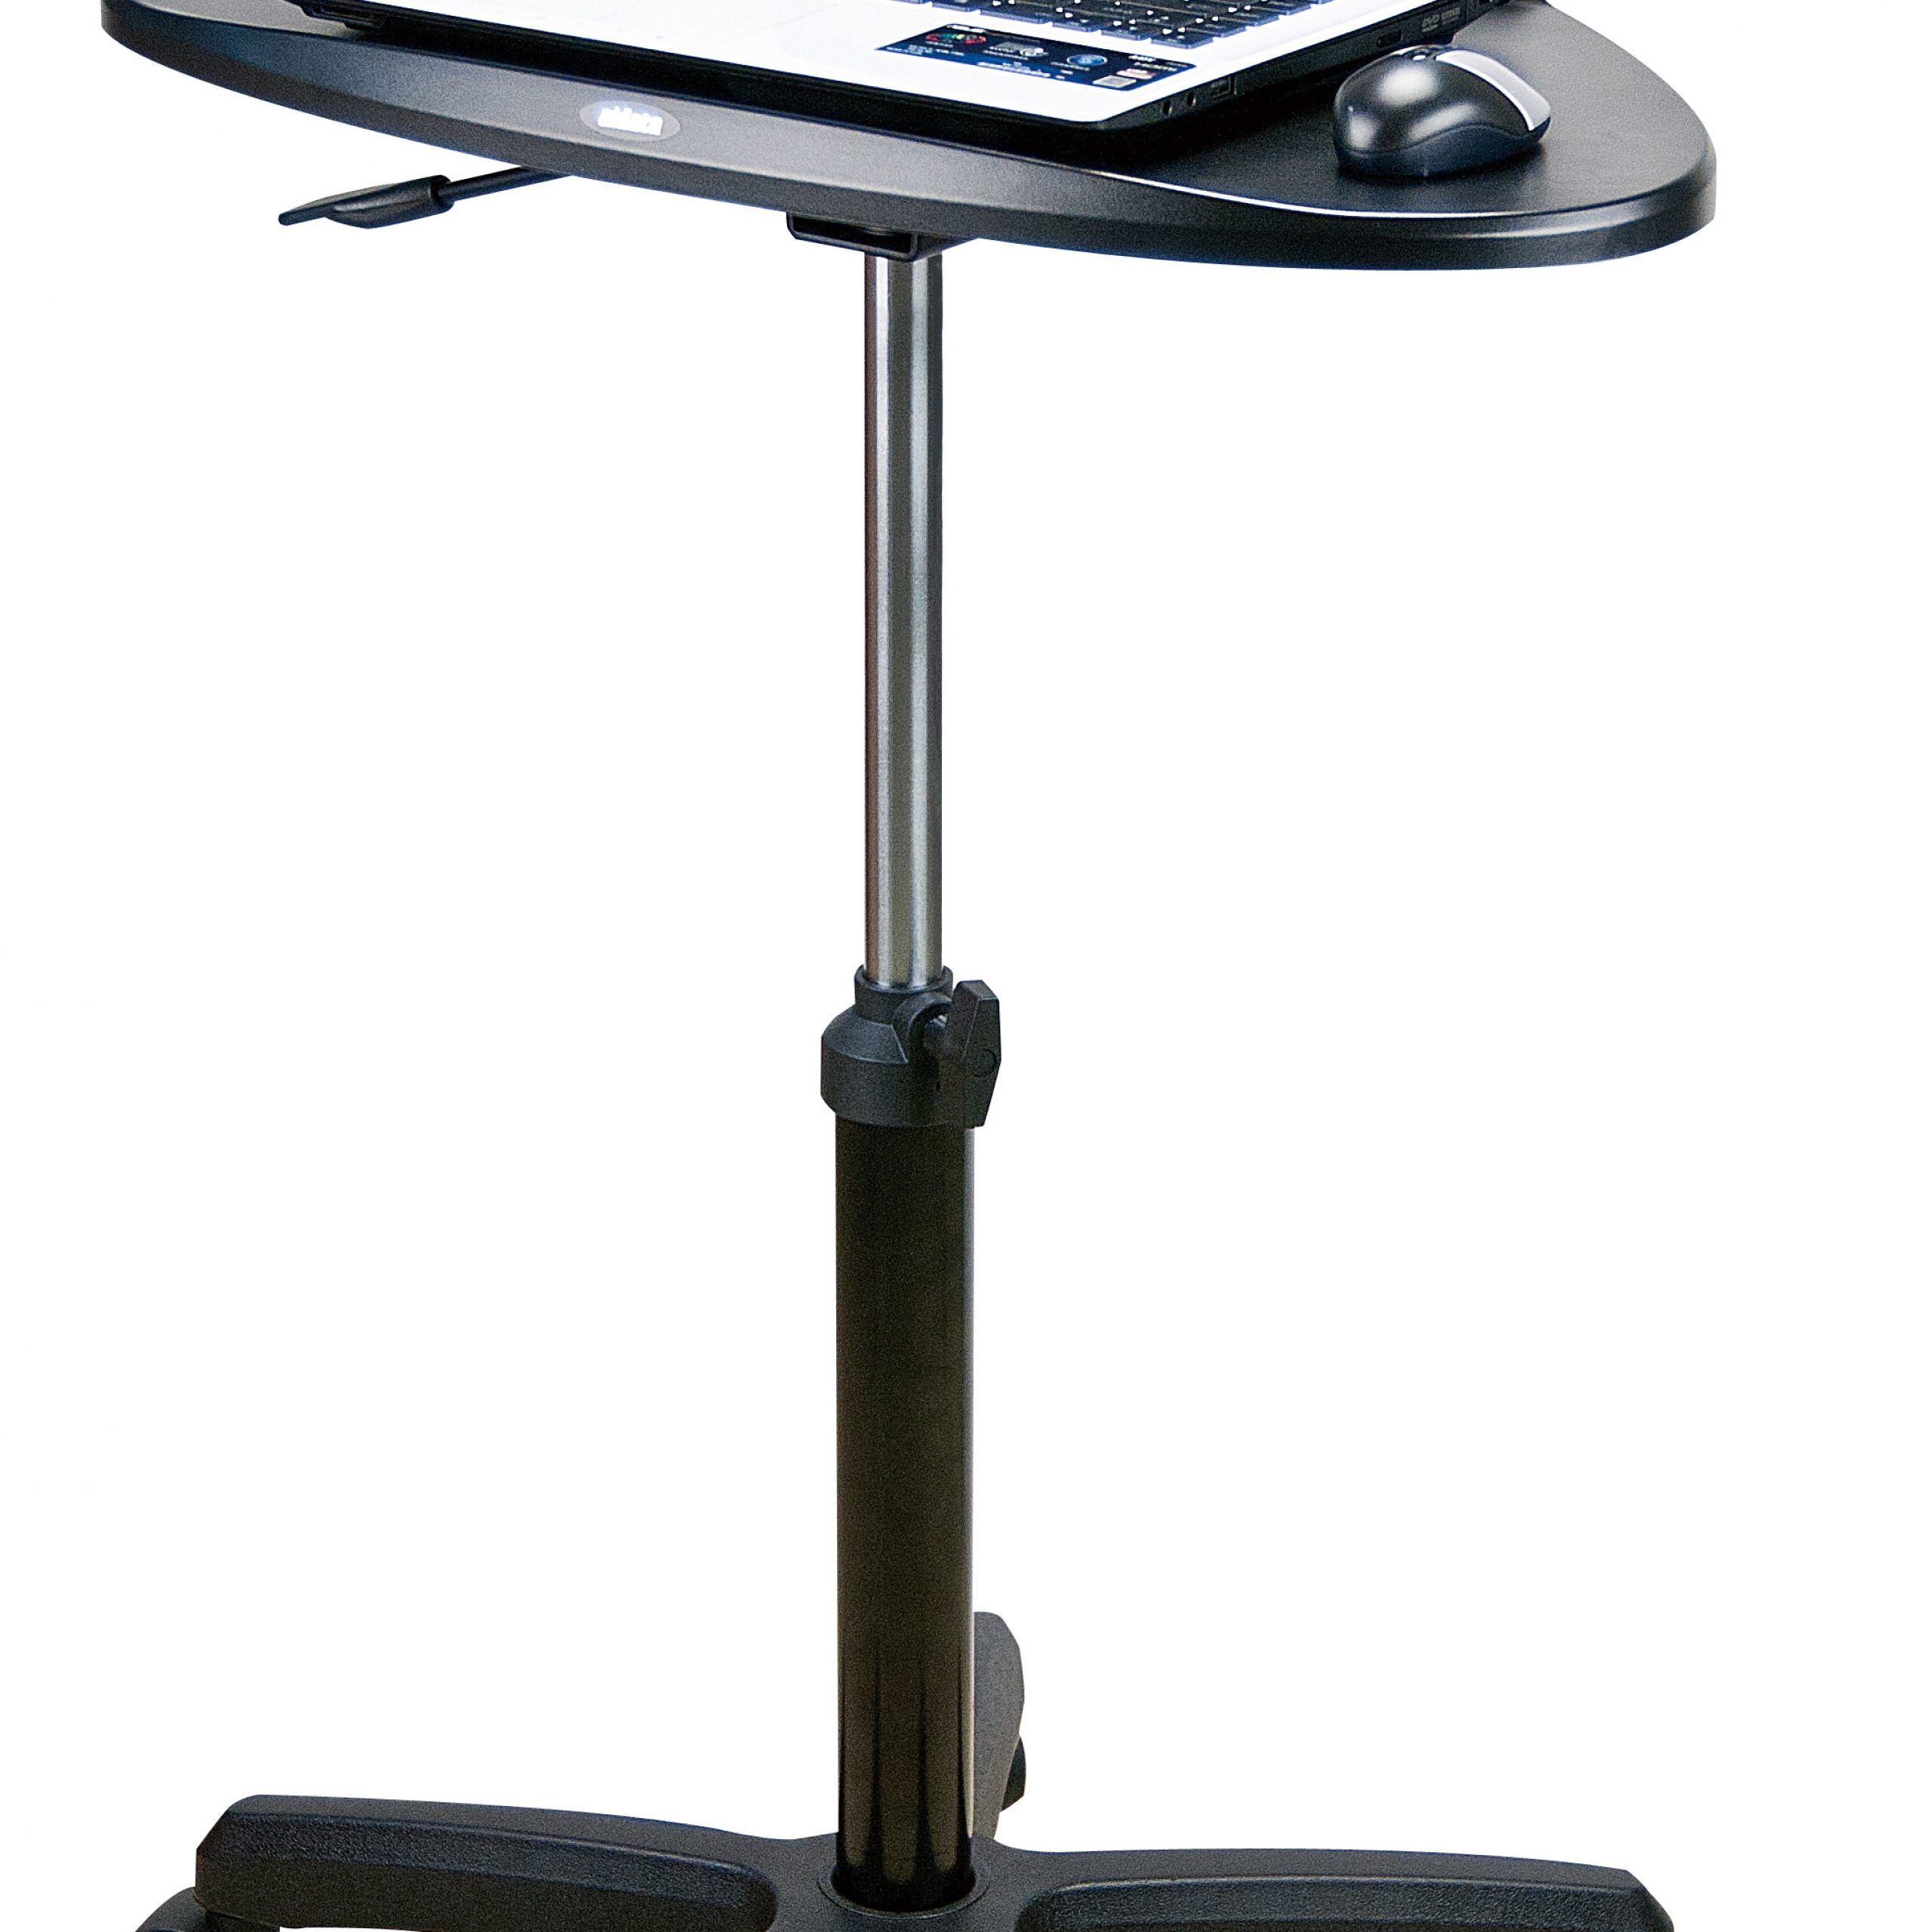 Upanatom Sit Stand Mobile Laptop Desk | Paramount Business Office Intended For Sit Stand Mobile Desks (View 10 of 15)